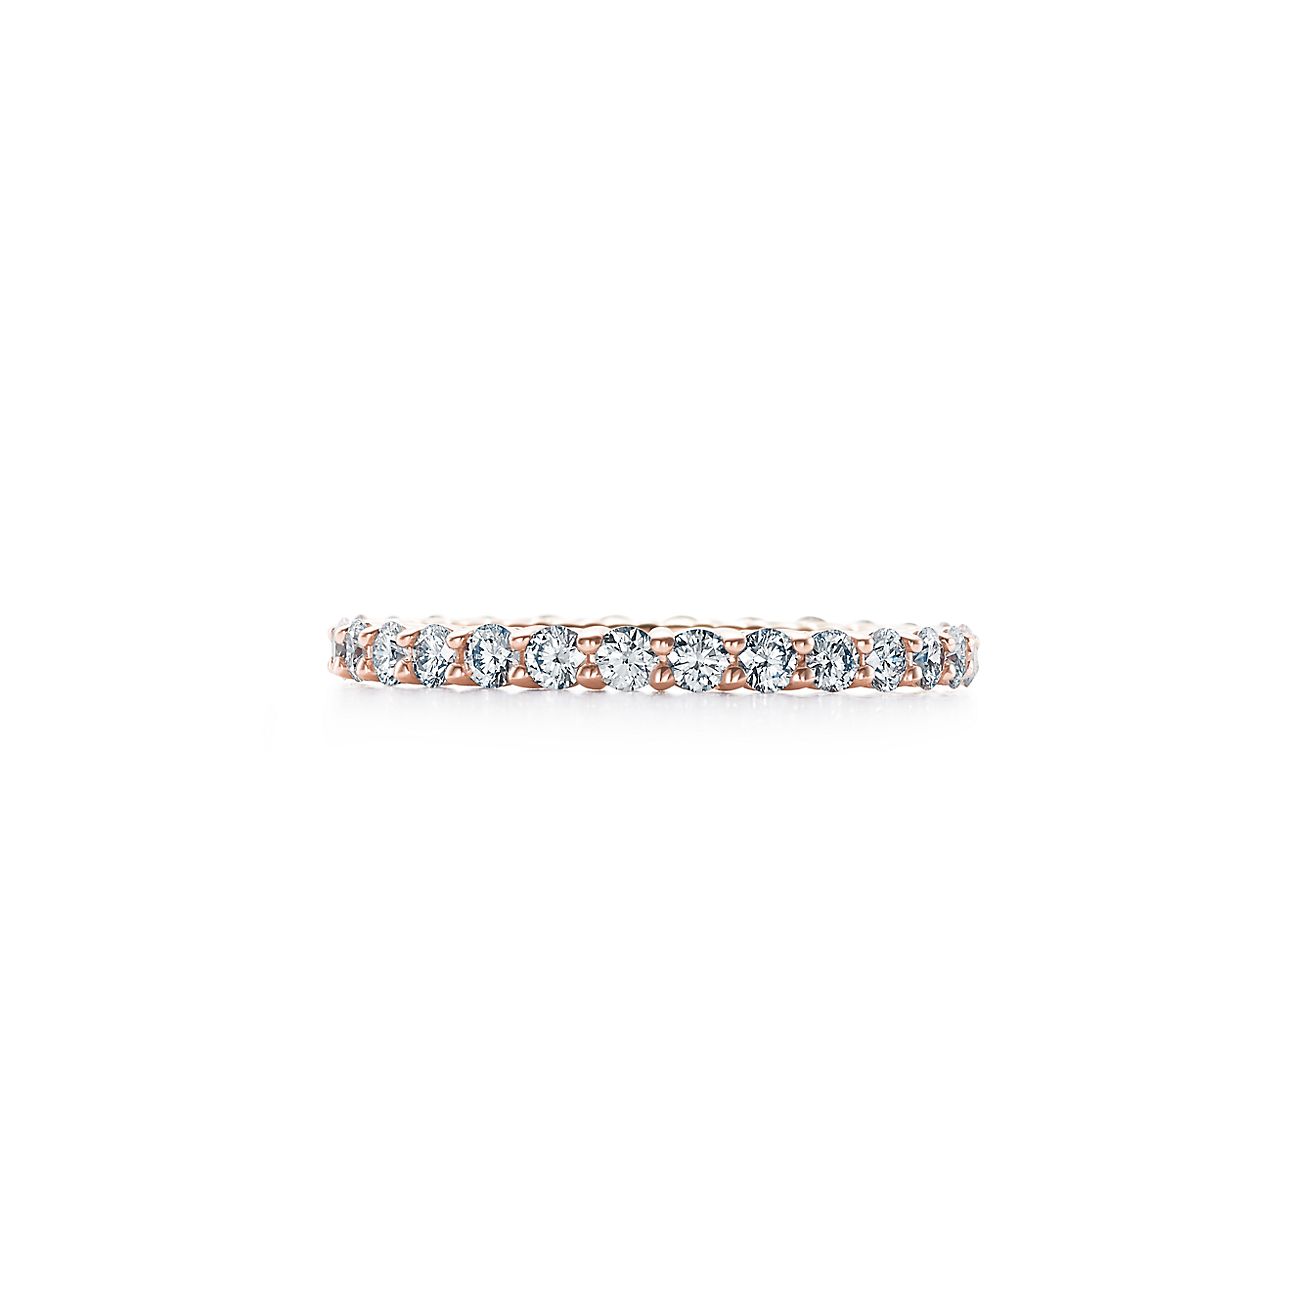 Tiffany Embrace® band ring in 18k rose 